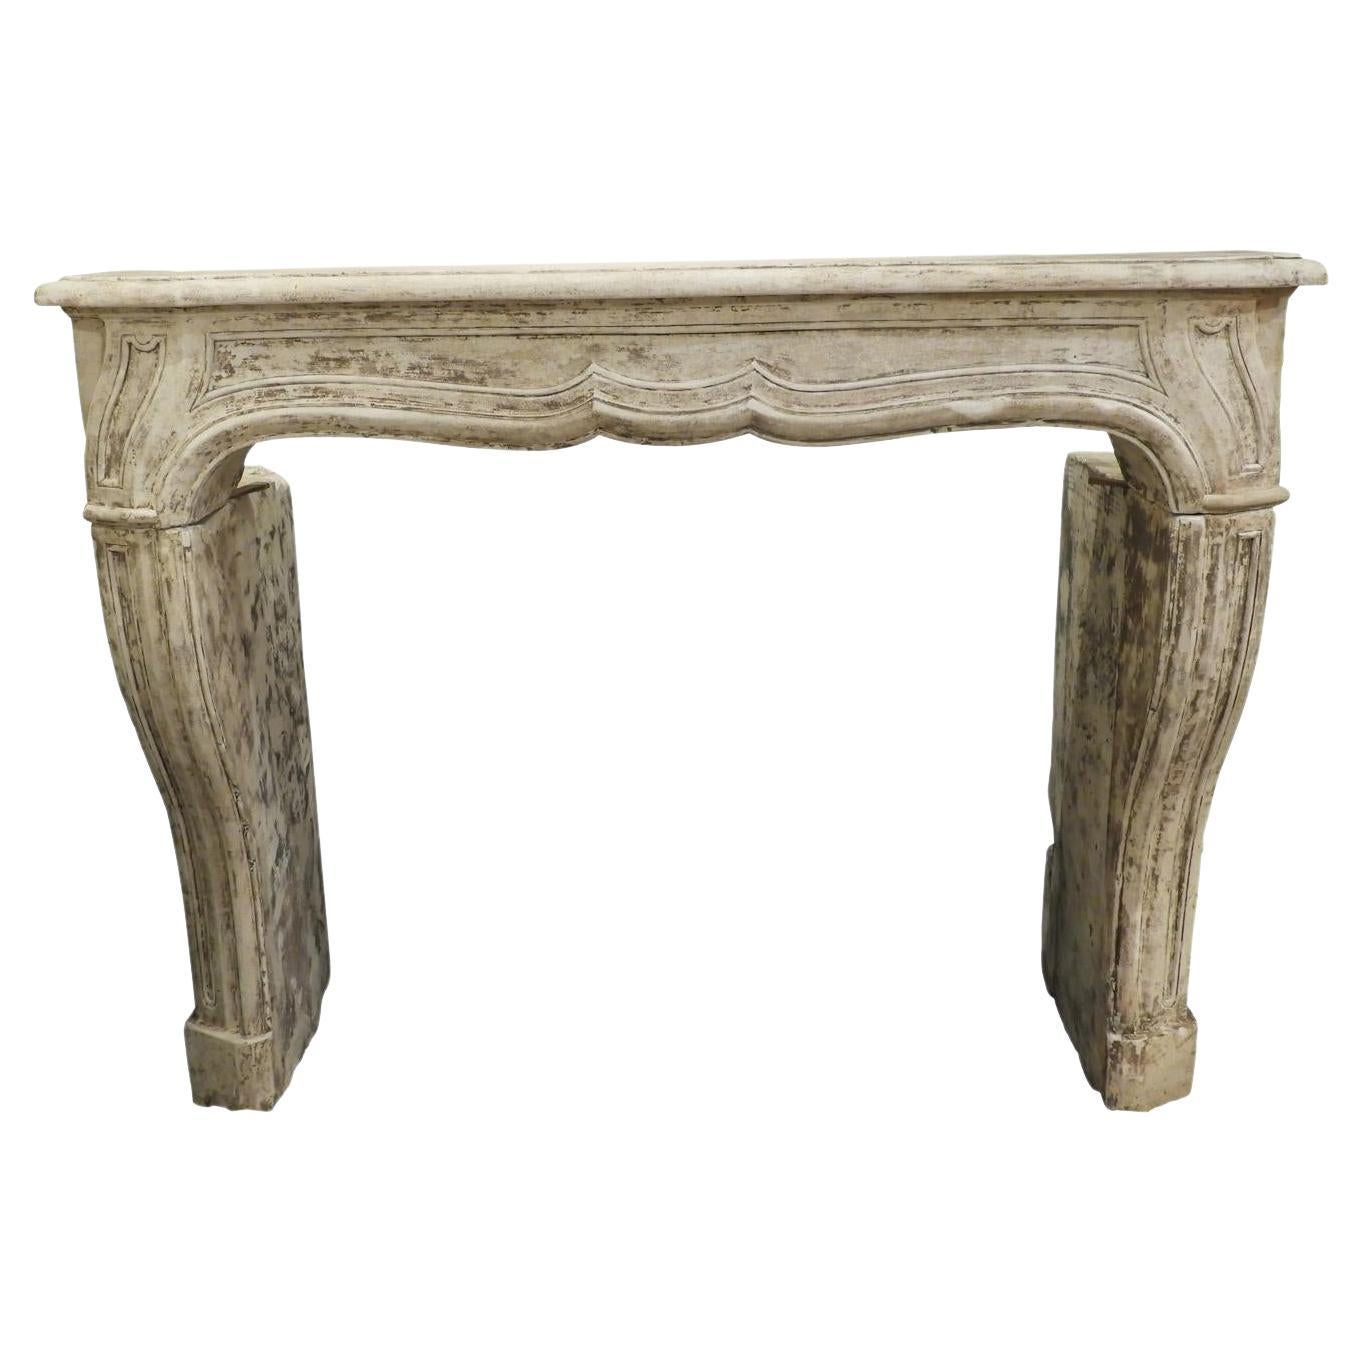 19th Century French Limestone Fireplace Mantel For Sale